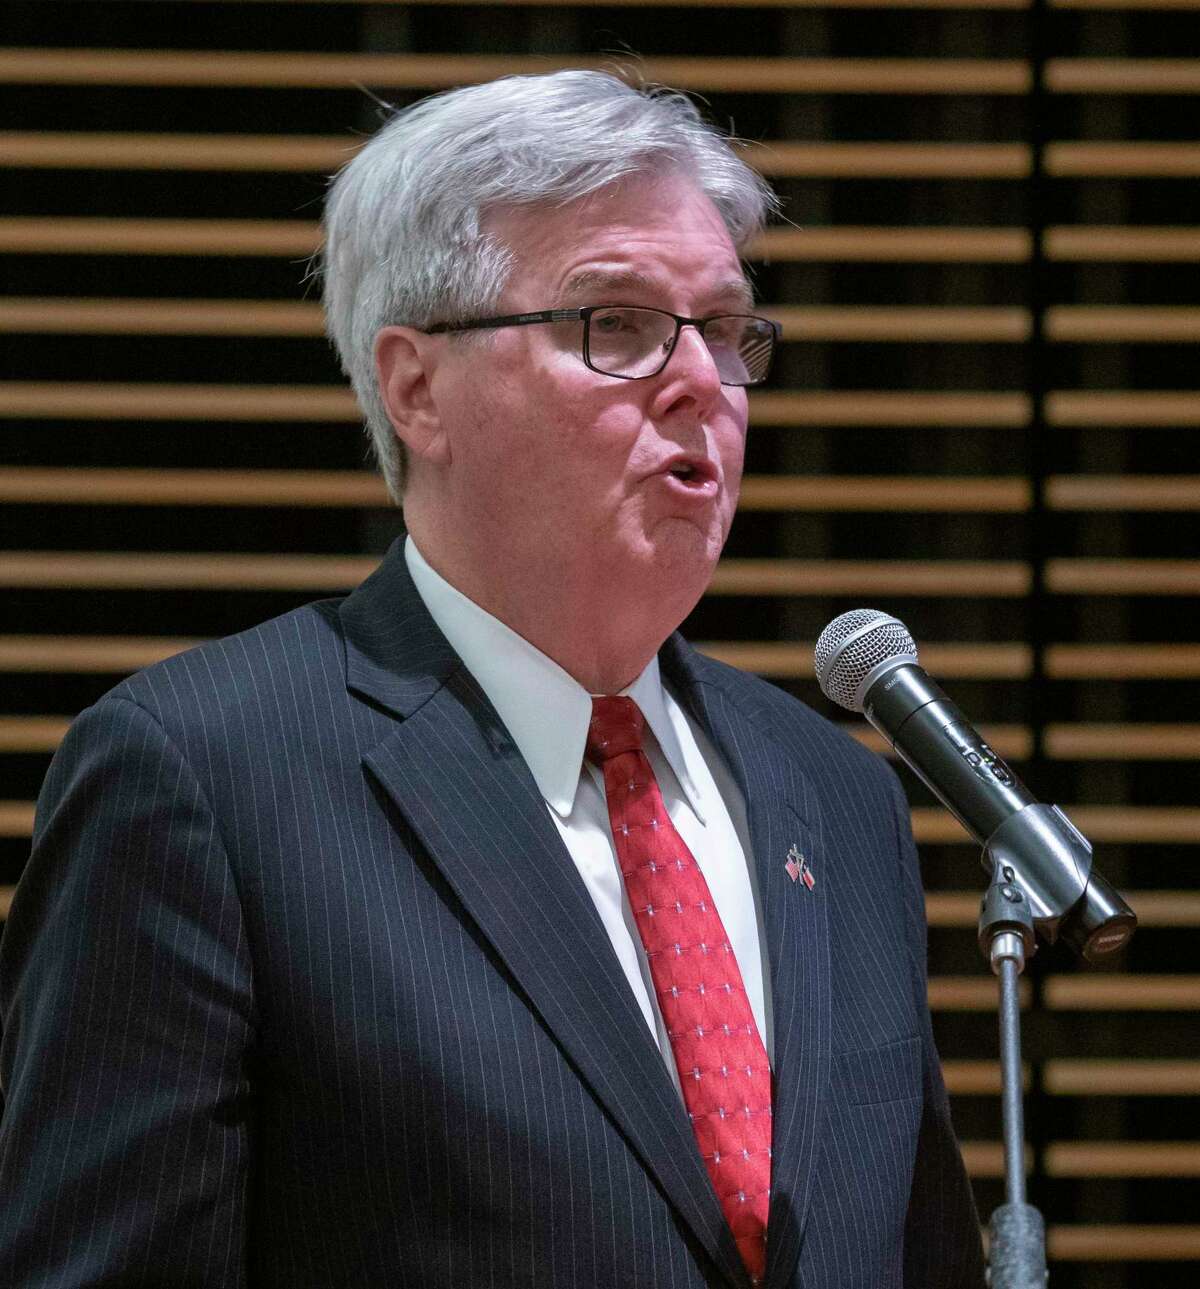 Texas Lt. Governor Dan Patrick speaks 02/16/2022 at the Wagner Noel Performing Arts Center, during a joint event with Kevin Sparks, running for District 31 Texas Senate seat. Tim Fischer/Reporter-Telegram